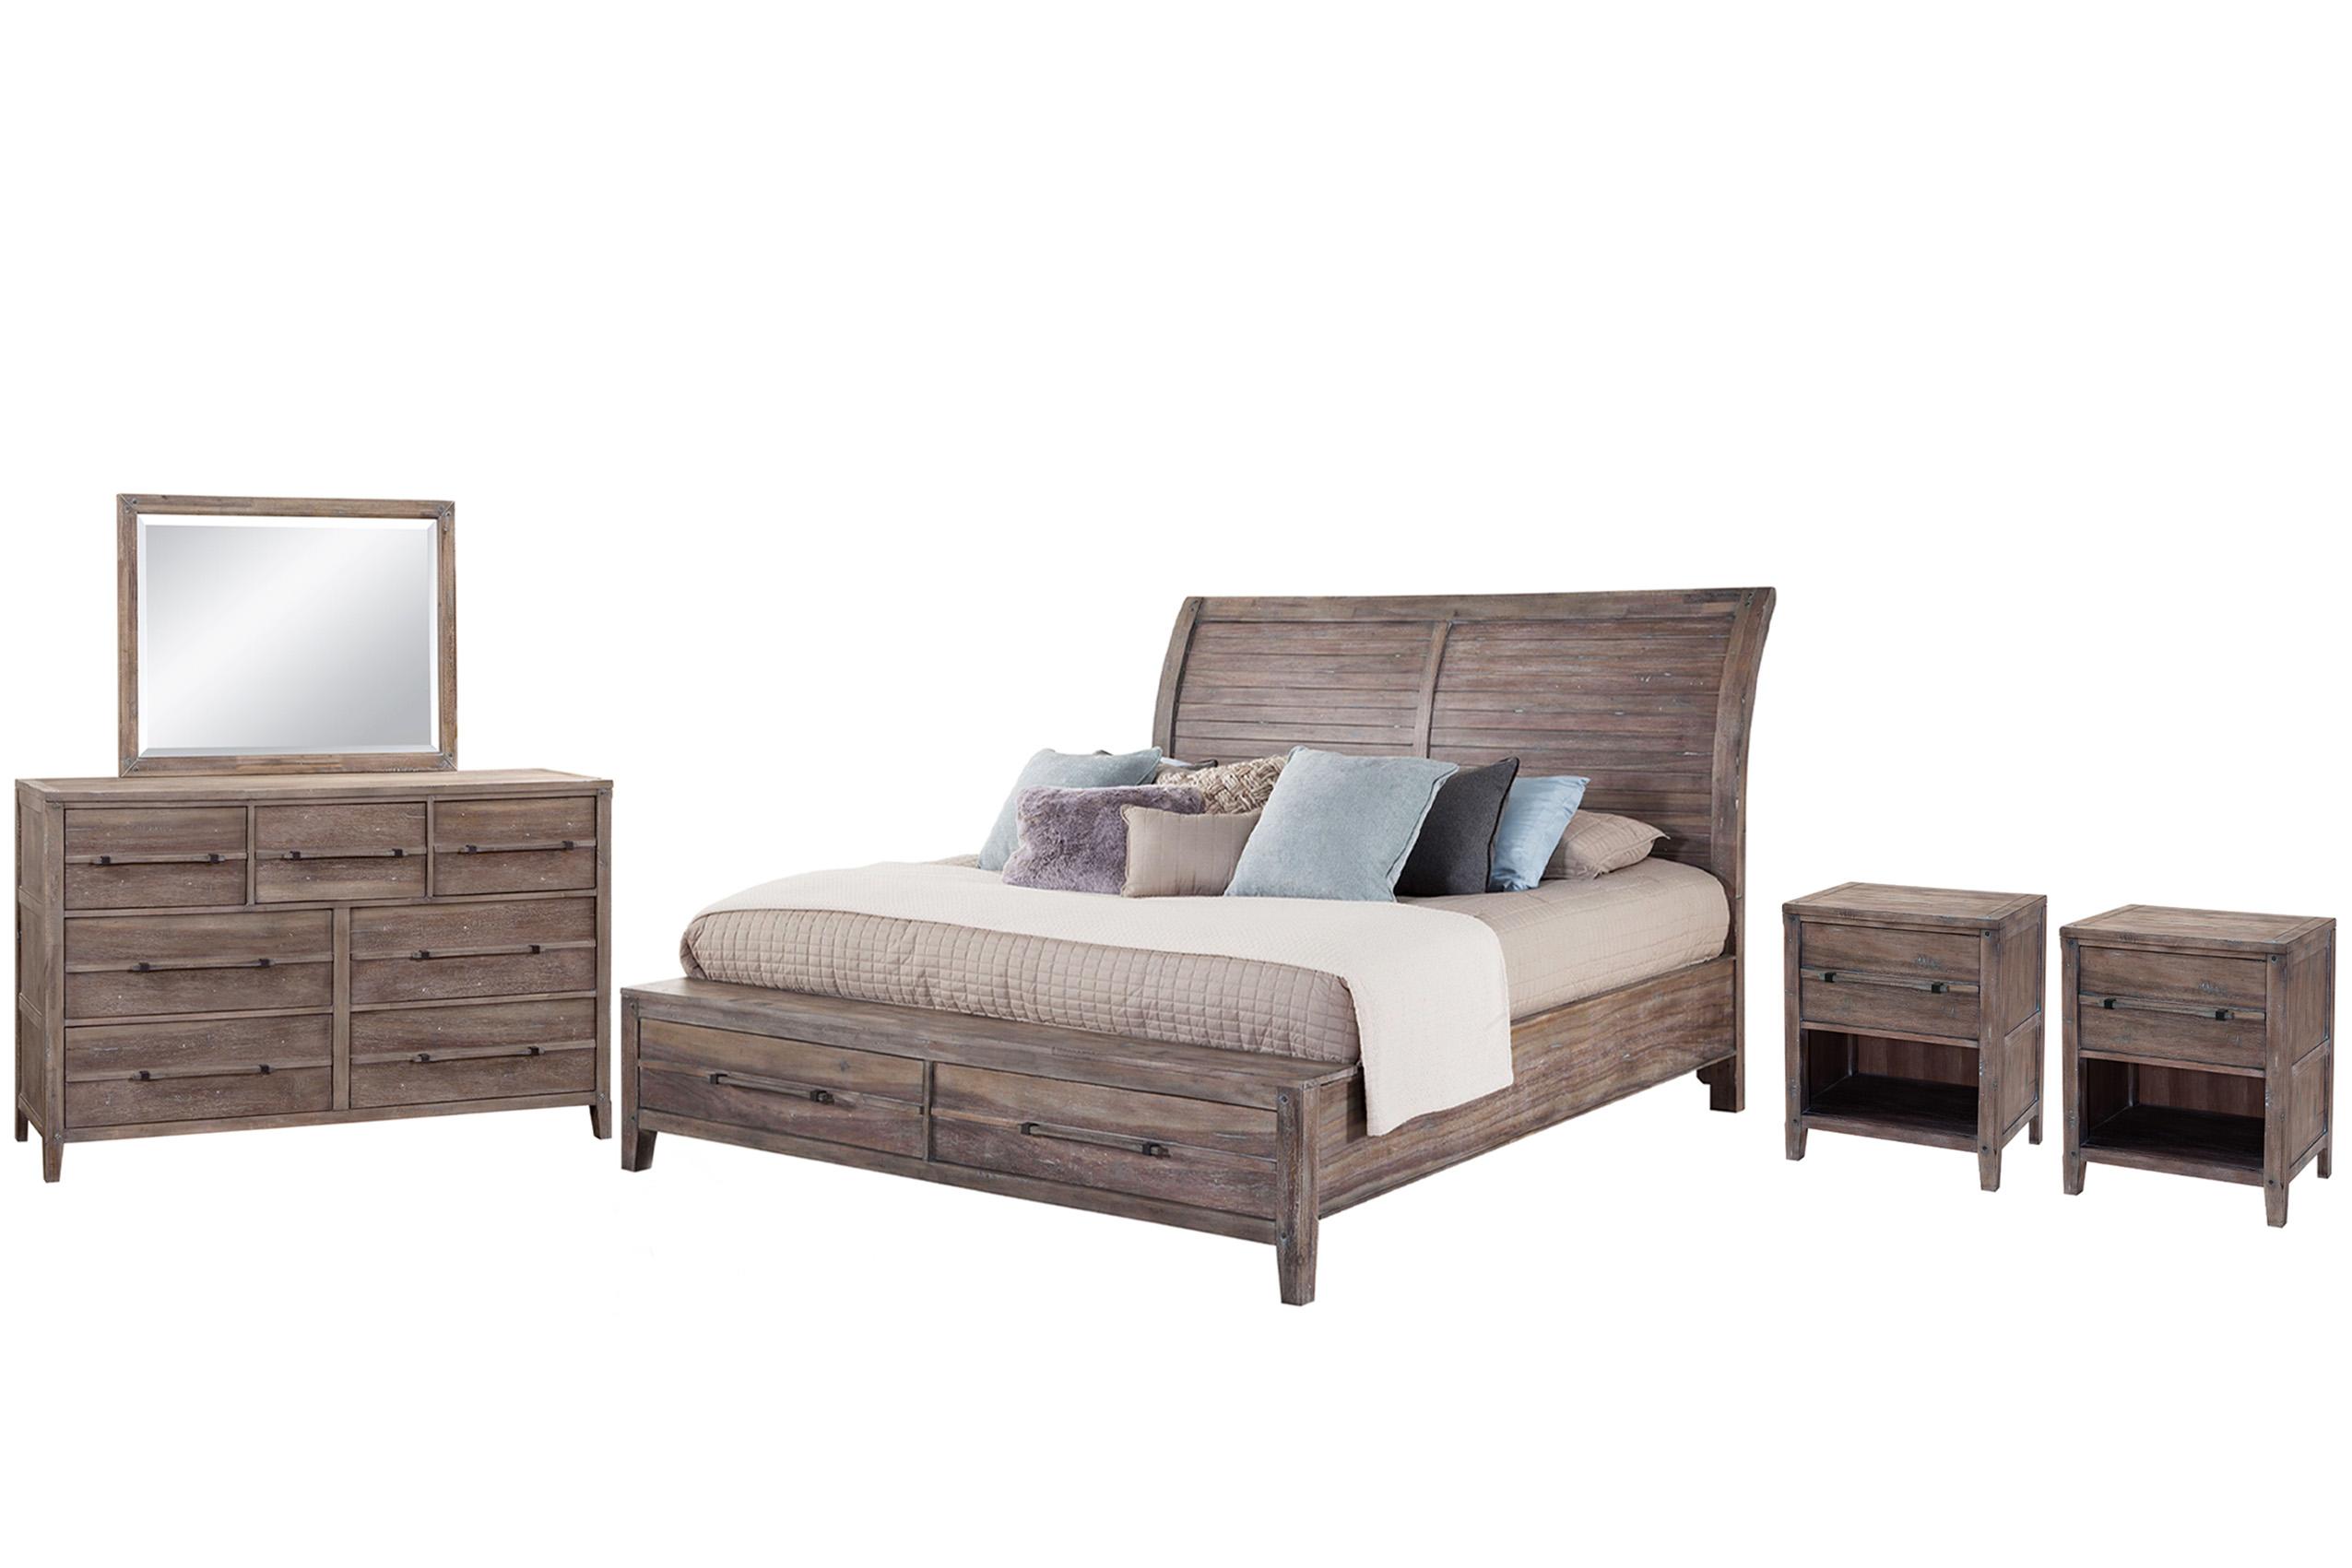 Classic, Traditional Sleigh Bedroom Set AURORA 2800-66SLES 2800-66SLES-2NDM-5PC in Driftwood, Gray 